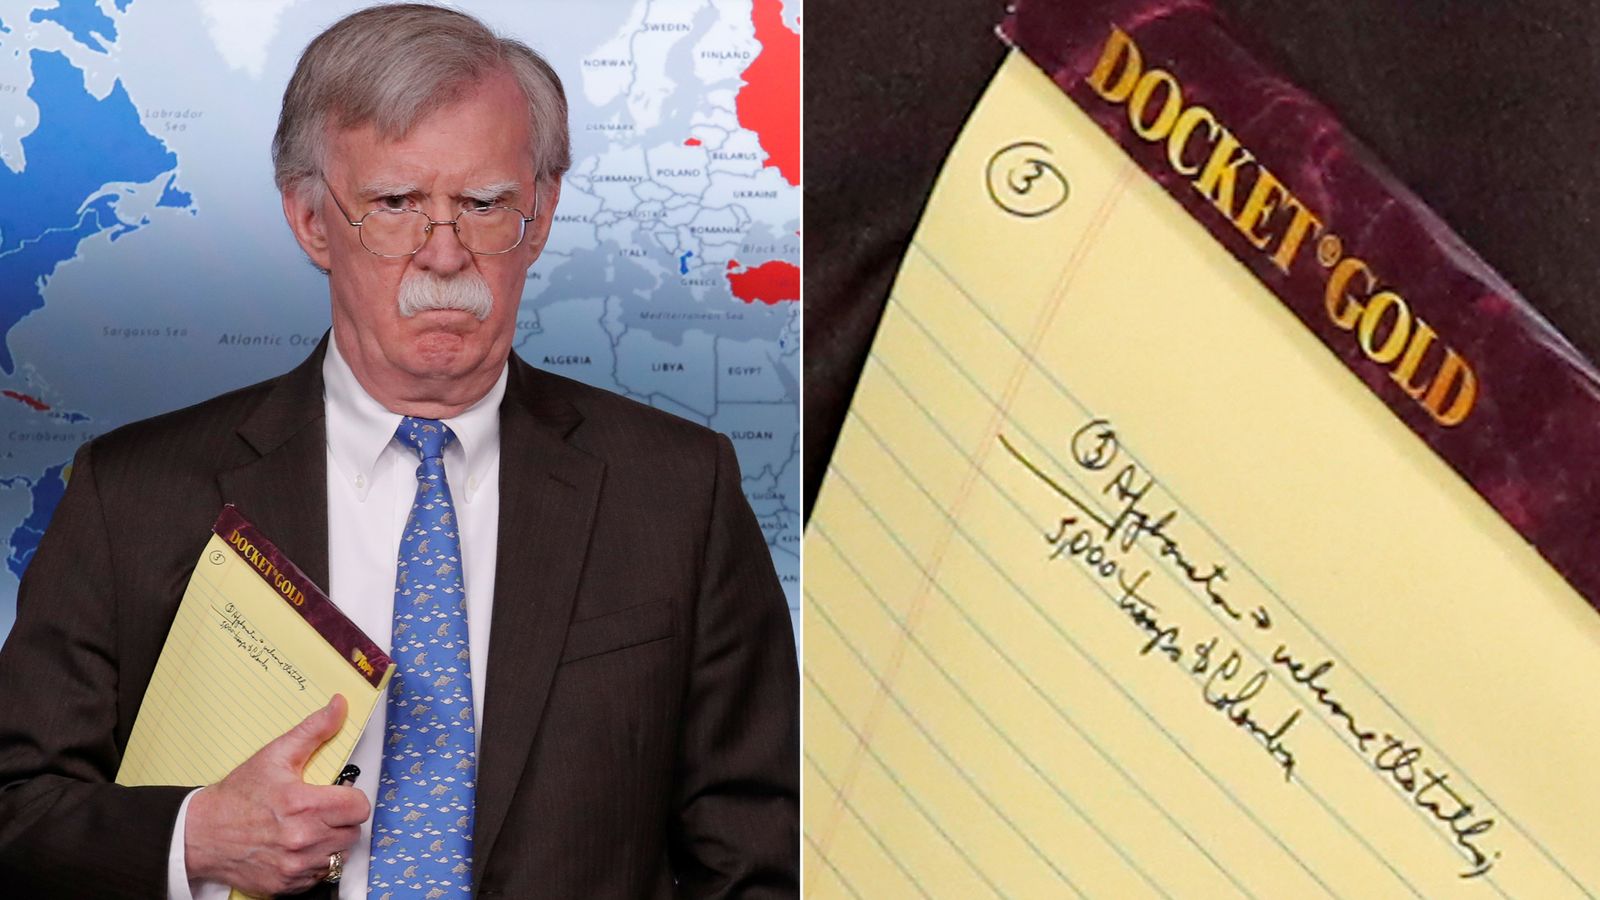 Bolton flashes '5,000 troops to Colombia' note as he announces new Venezuela sanctions ...